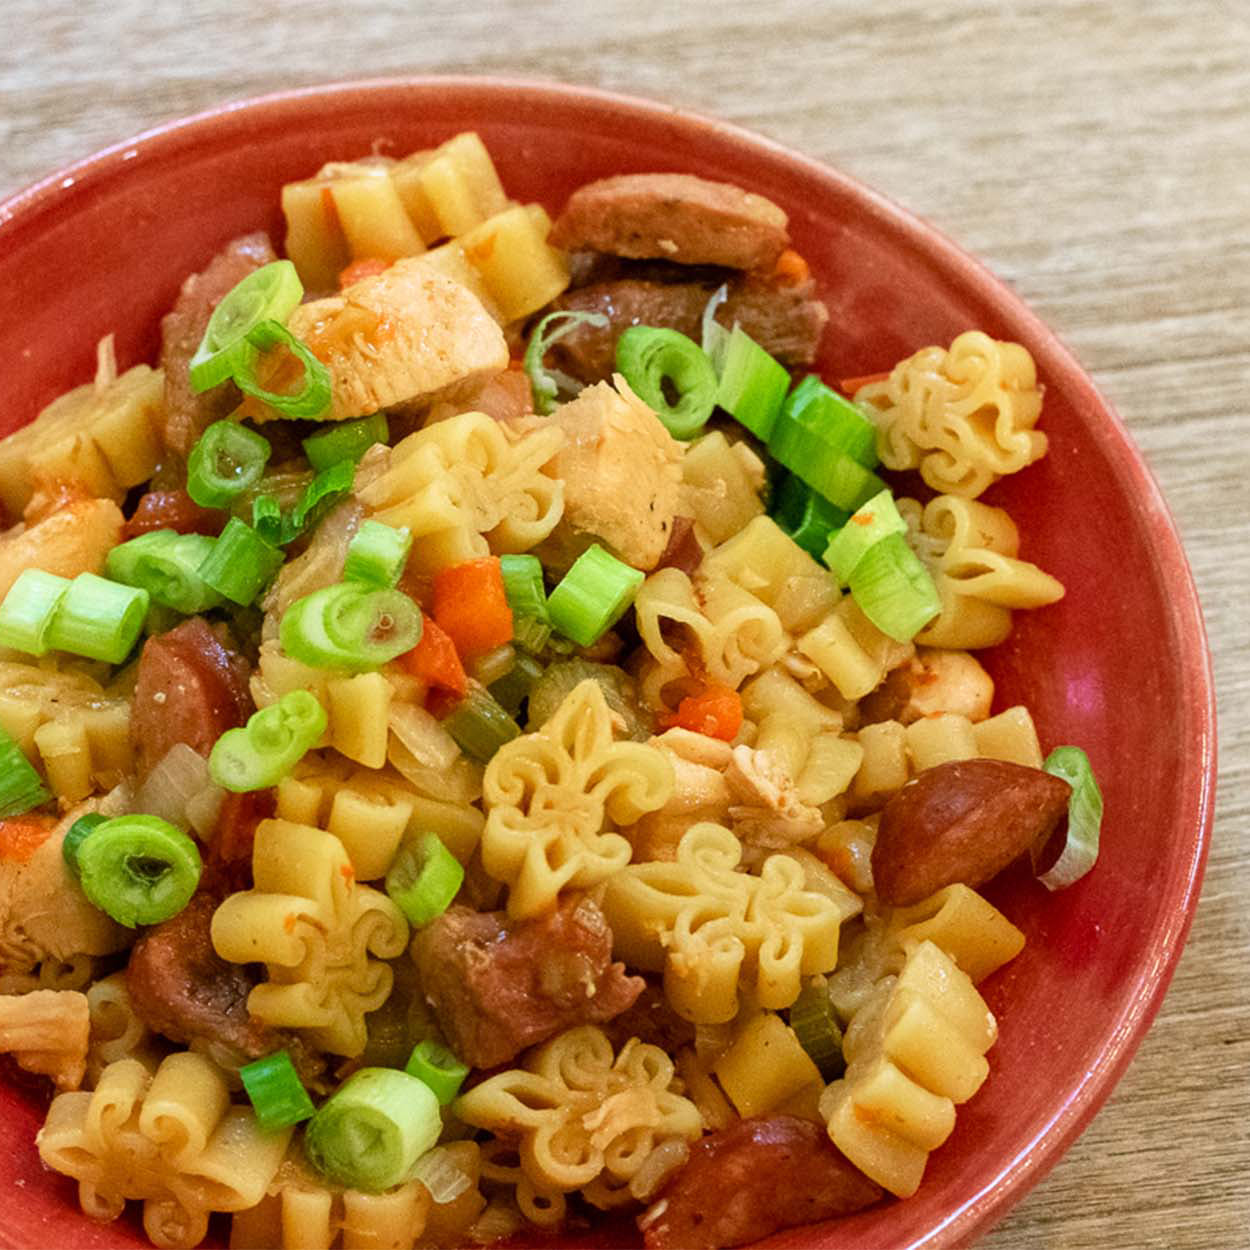 Close up of a red bowl filled with pastalaya, consisting of fleur de lis shaped pasta with andouille sausage, chicken, and vegetables.